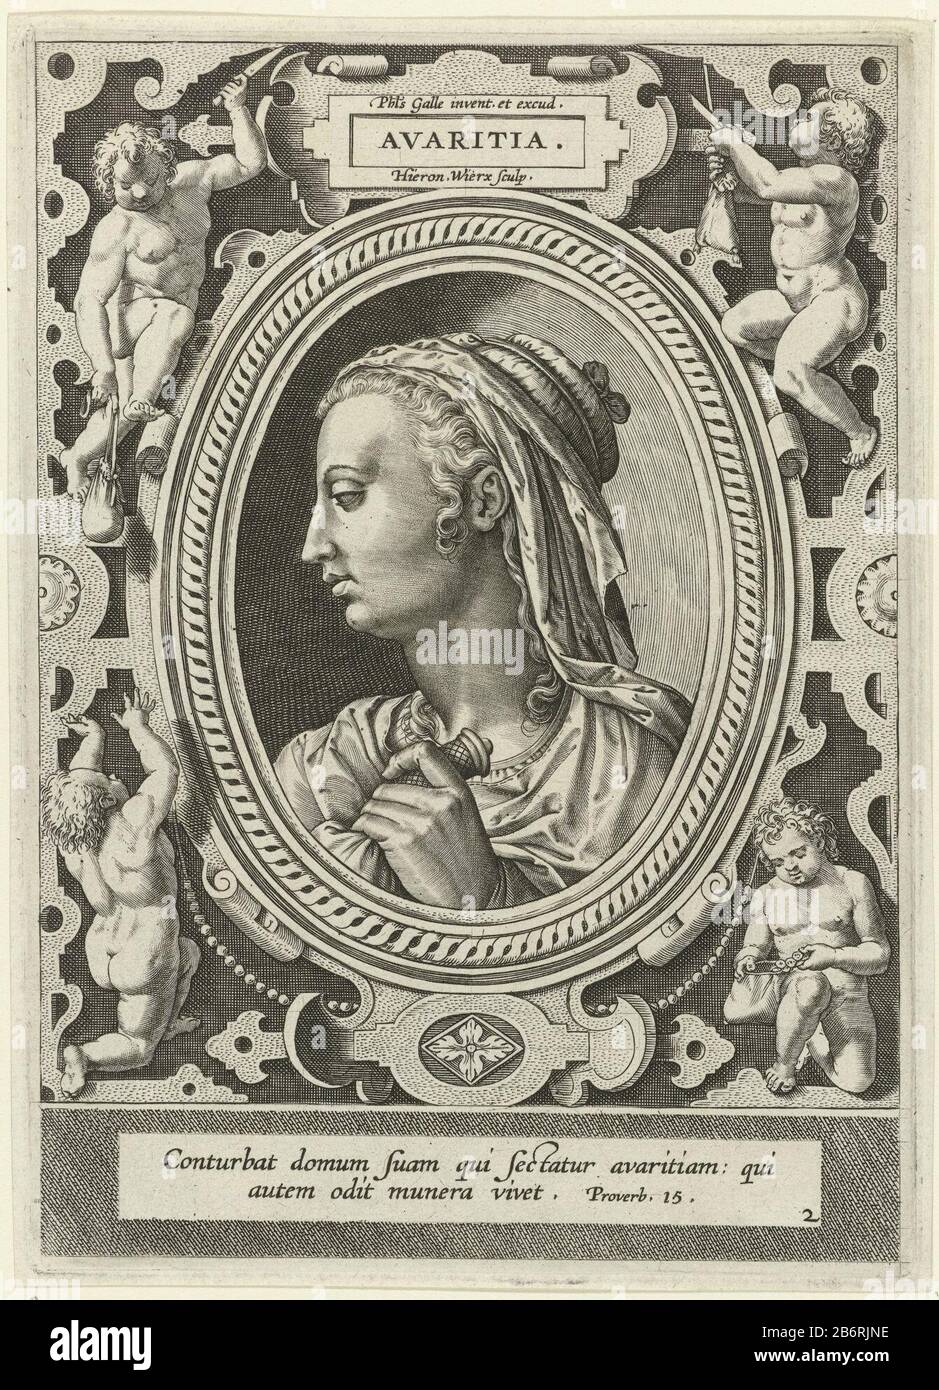 Gierigheid Avaritia (titel op object) Zeven hoofdzonden (serietitel) VII Peccatorvm Capitalivm Imagines Elegantissime () (serietitel) Bust of the female personification of Avarice (Avaritia). In her hand she holds a scholarship sticks. The idea is contained in a cartouche, surrounded by putti. In the frame in the margin of a two-line Bible Quotation from Prov. 15 in Latijn. Manufacturer : printmaker: Jerome Who: rix (listed property) designed by Philips Galle (listed building) publisher: Philip Galle (listed property) Place manufacture: Antwerp Date: 1563 - Characteristics 1612 Physical: car m Stock Photo